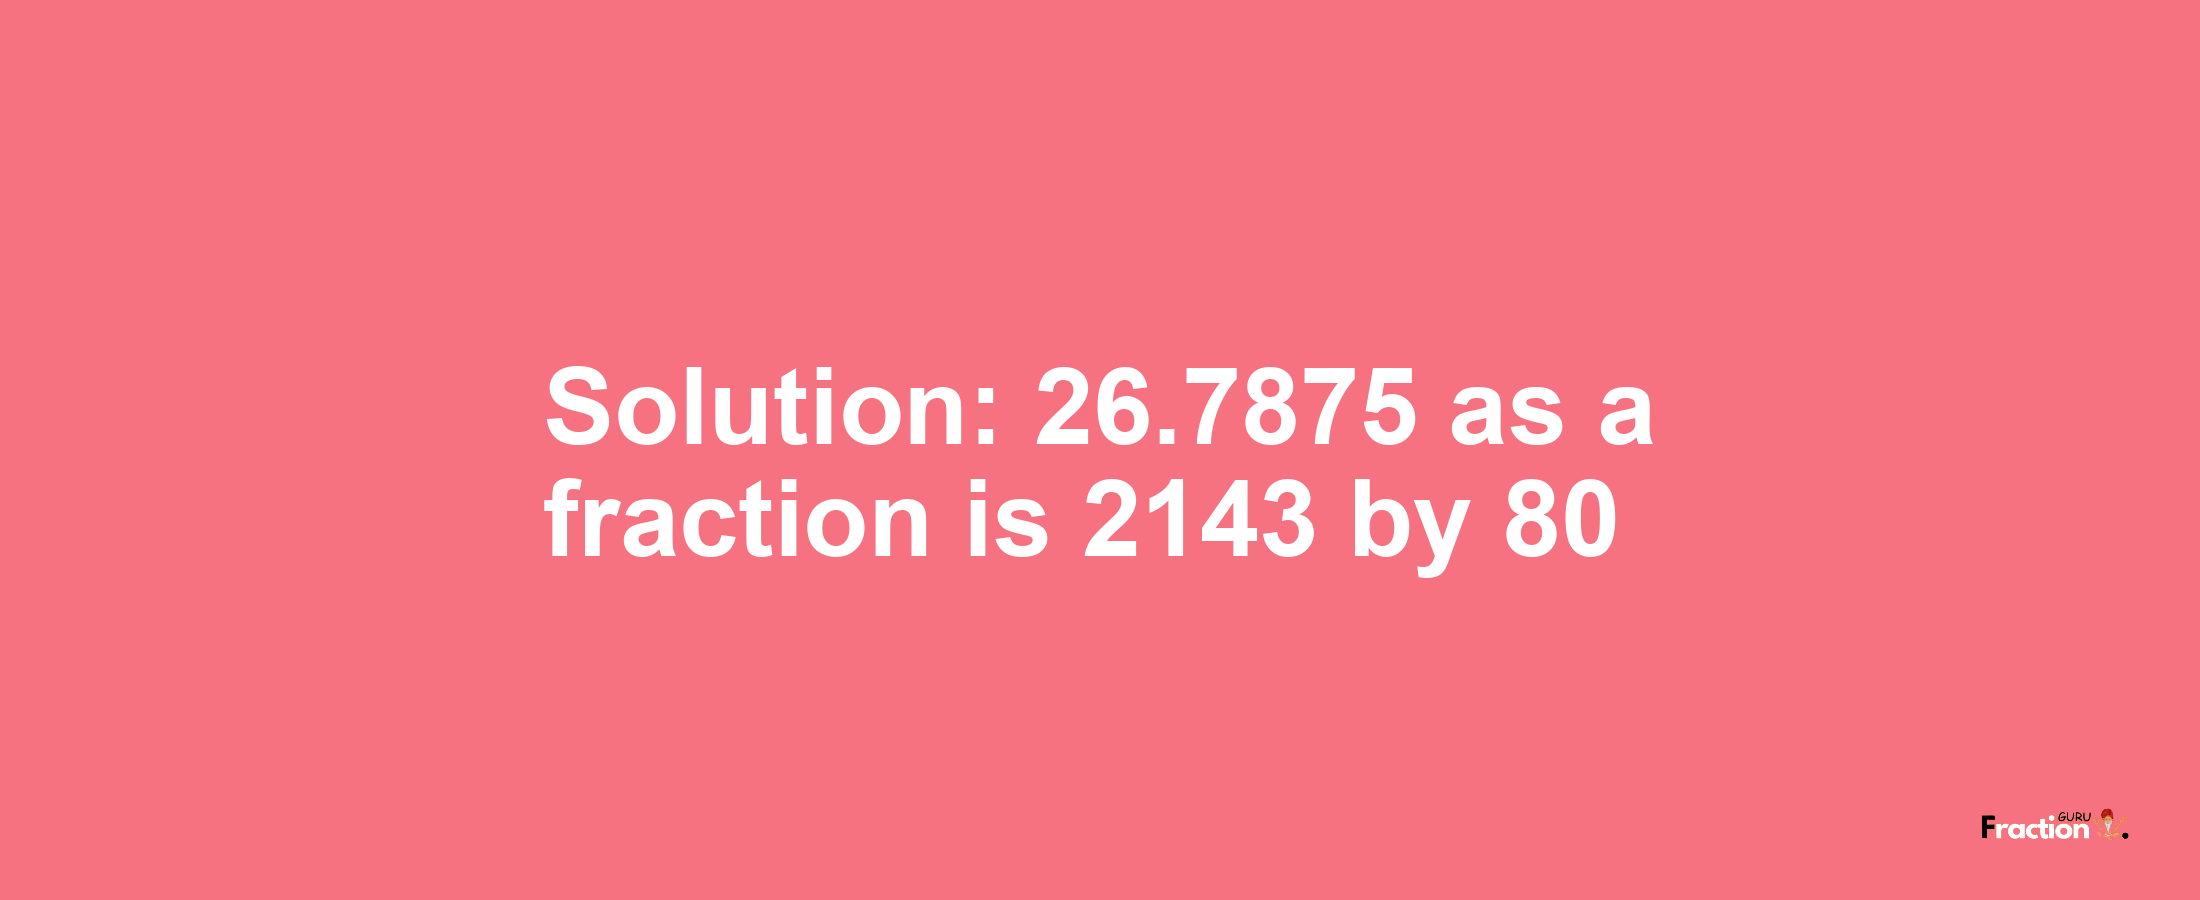 Solution:26.7875 as a fraction is 2143/80